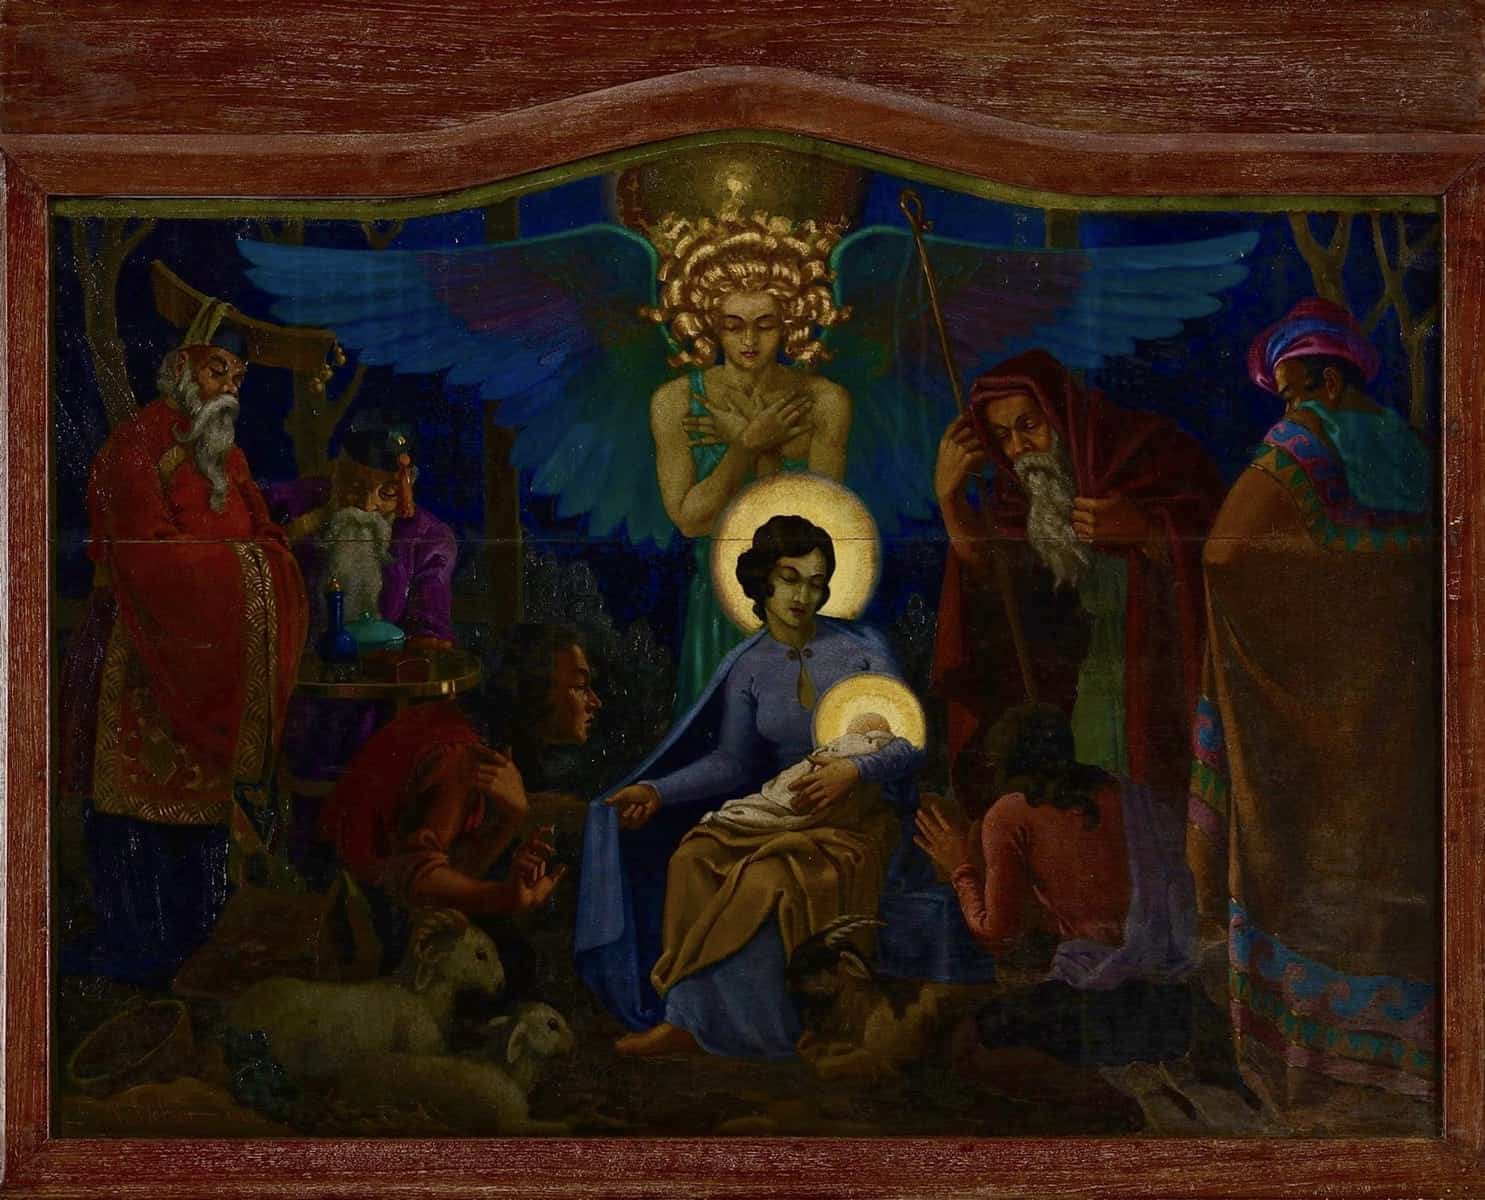 Richard Walker's Epiphany- Painted during his time in Changi Prison as a POW